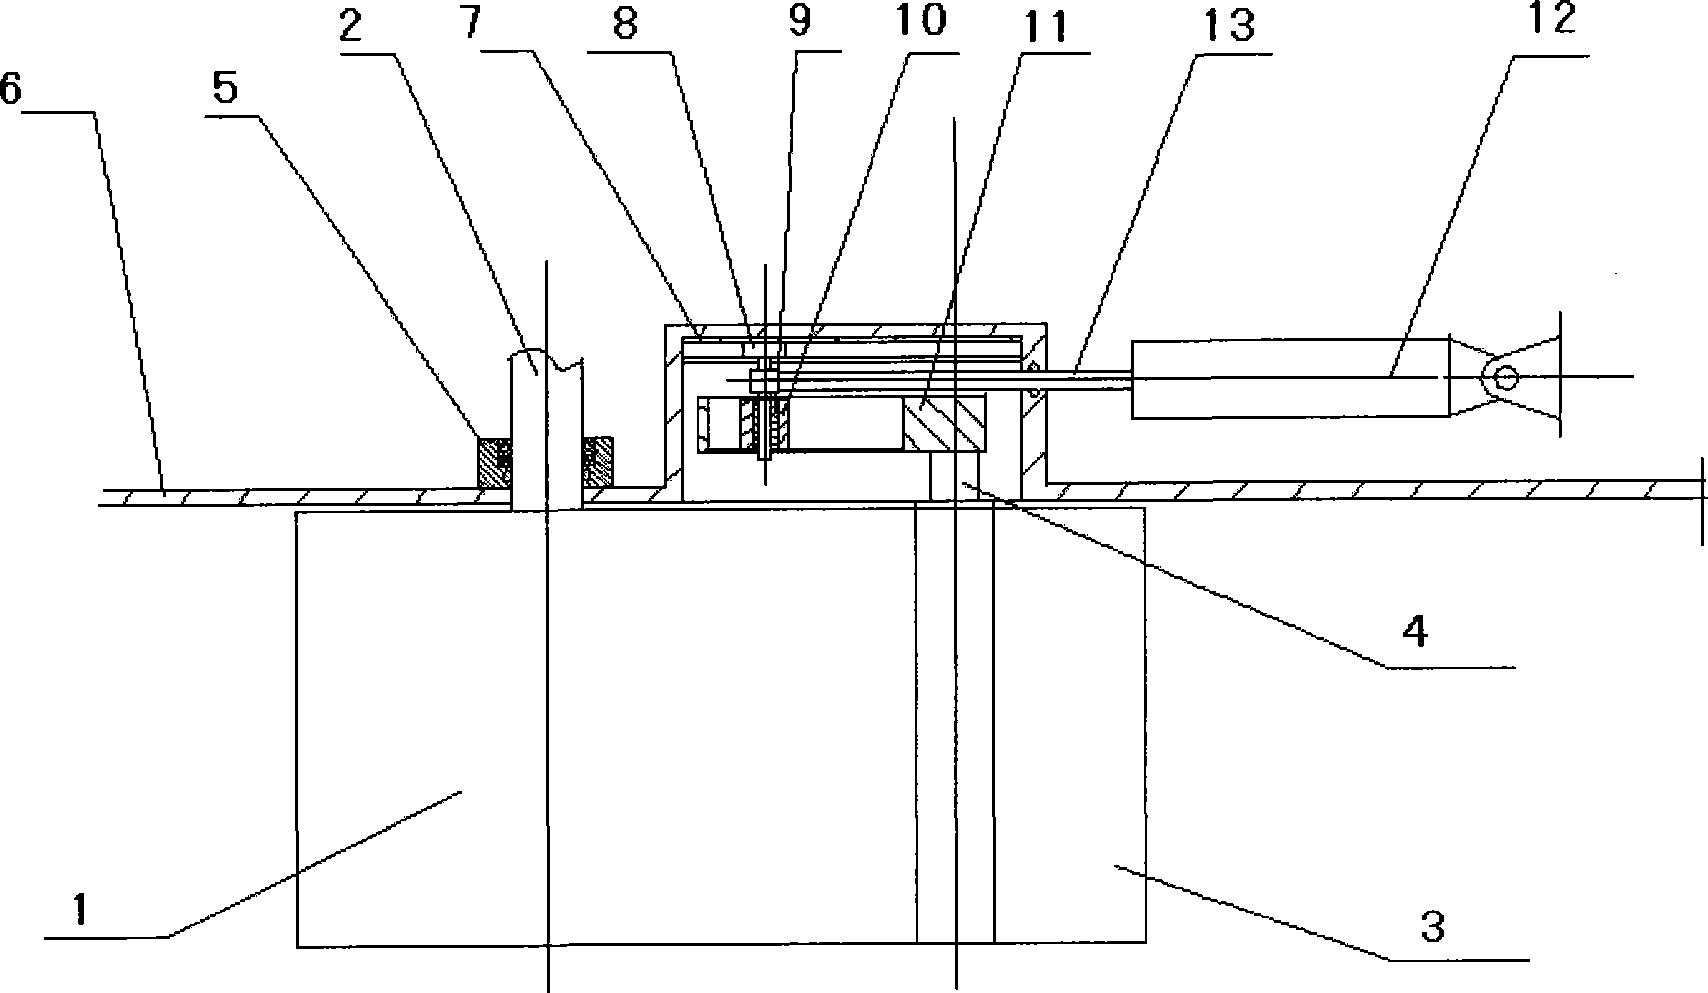 Transmission device of any rotation angle ratio of ship flap rudder of slide block type